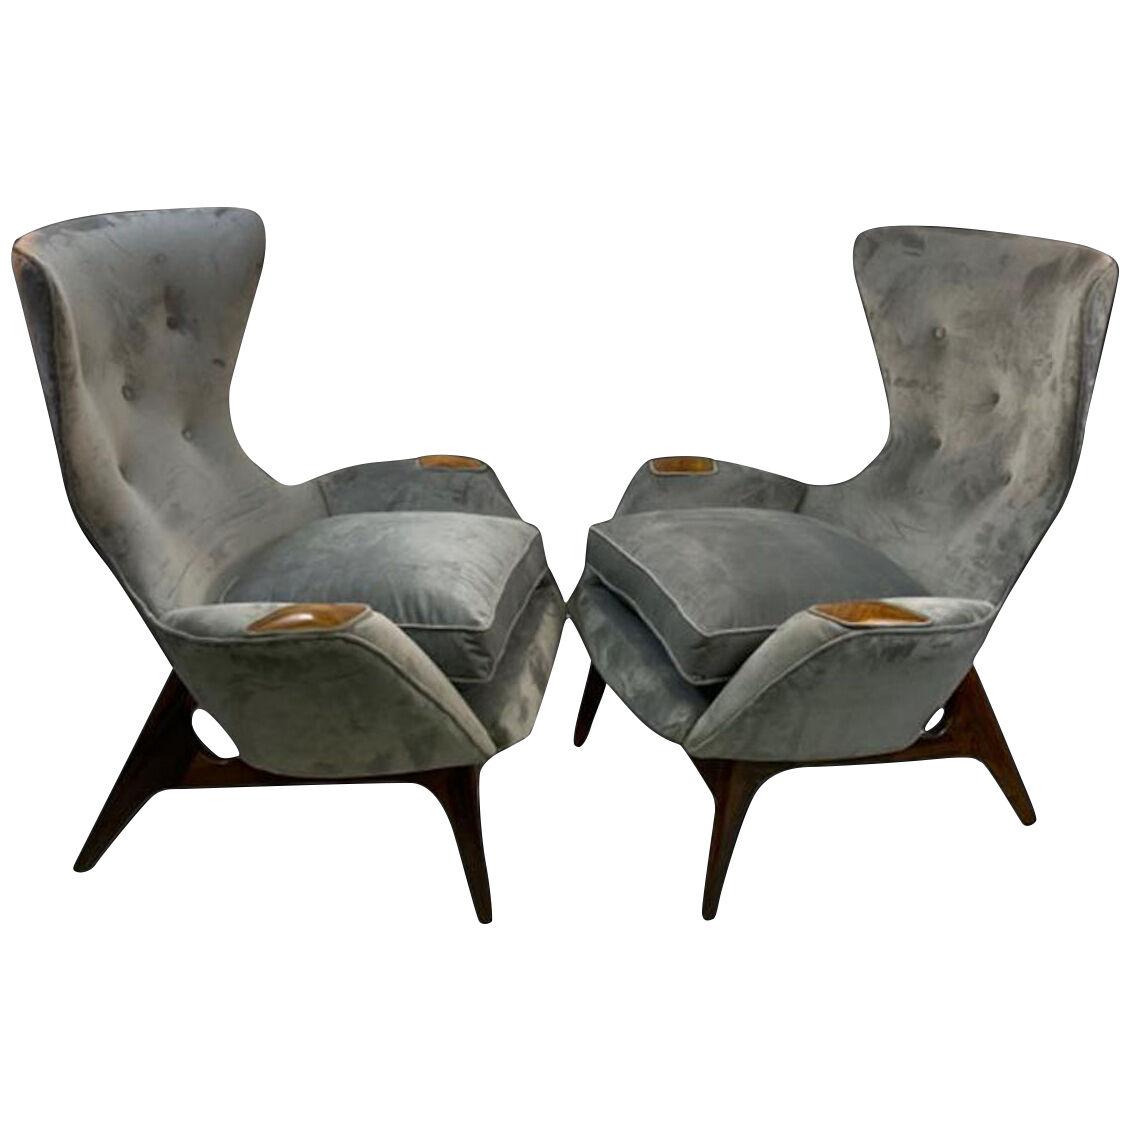 Vintage Modernist Adrian Pearsall Wingback Chairs